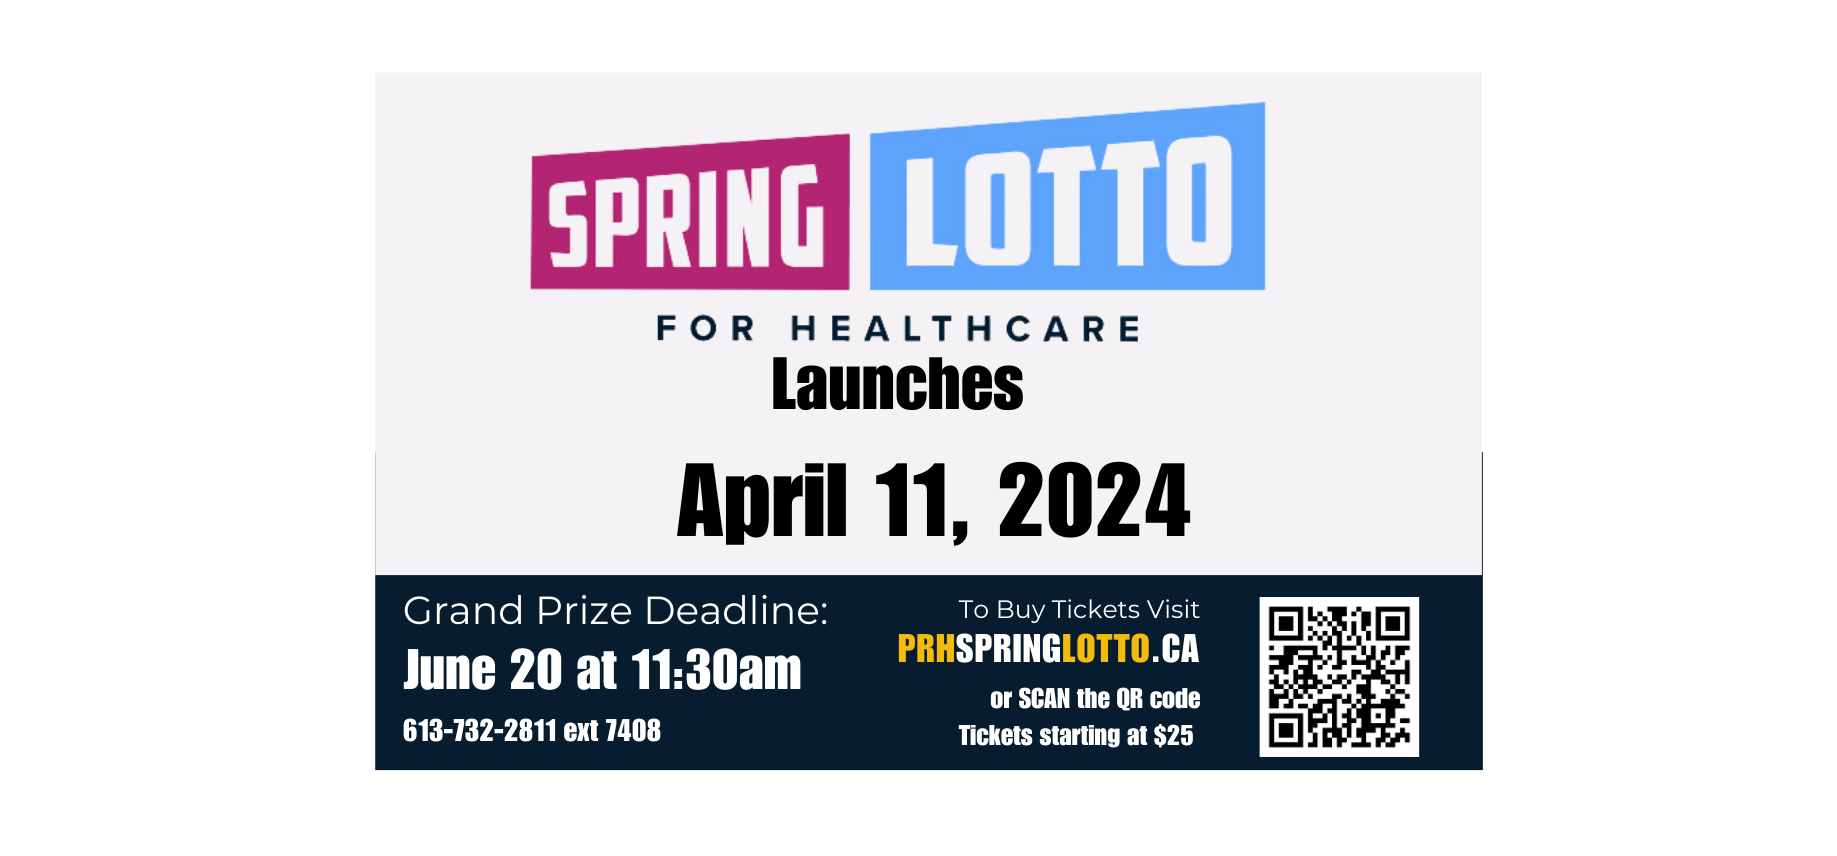 Spring Lotto for Healthcare